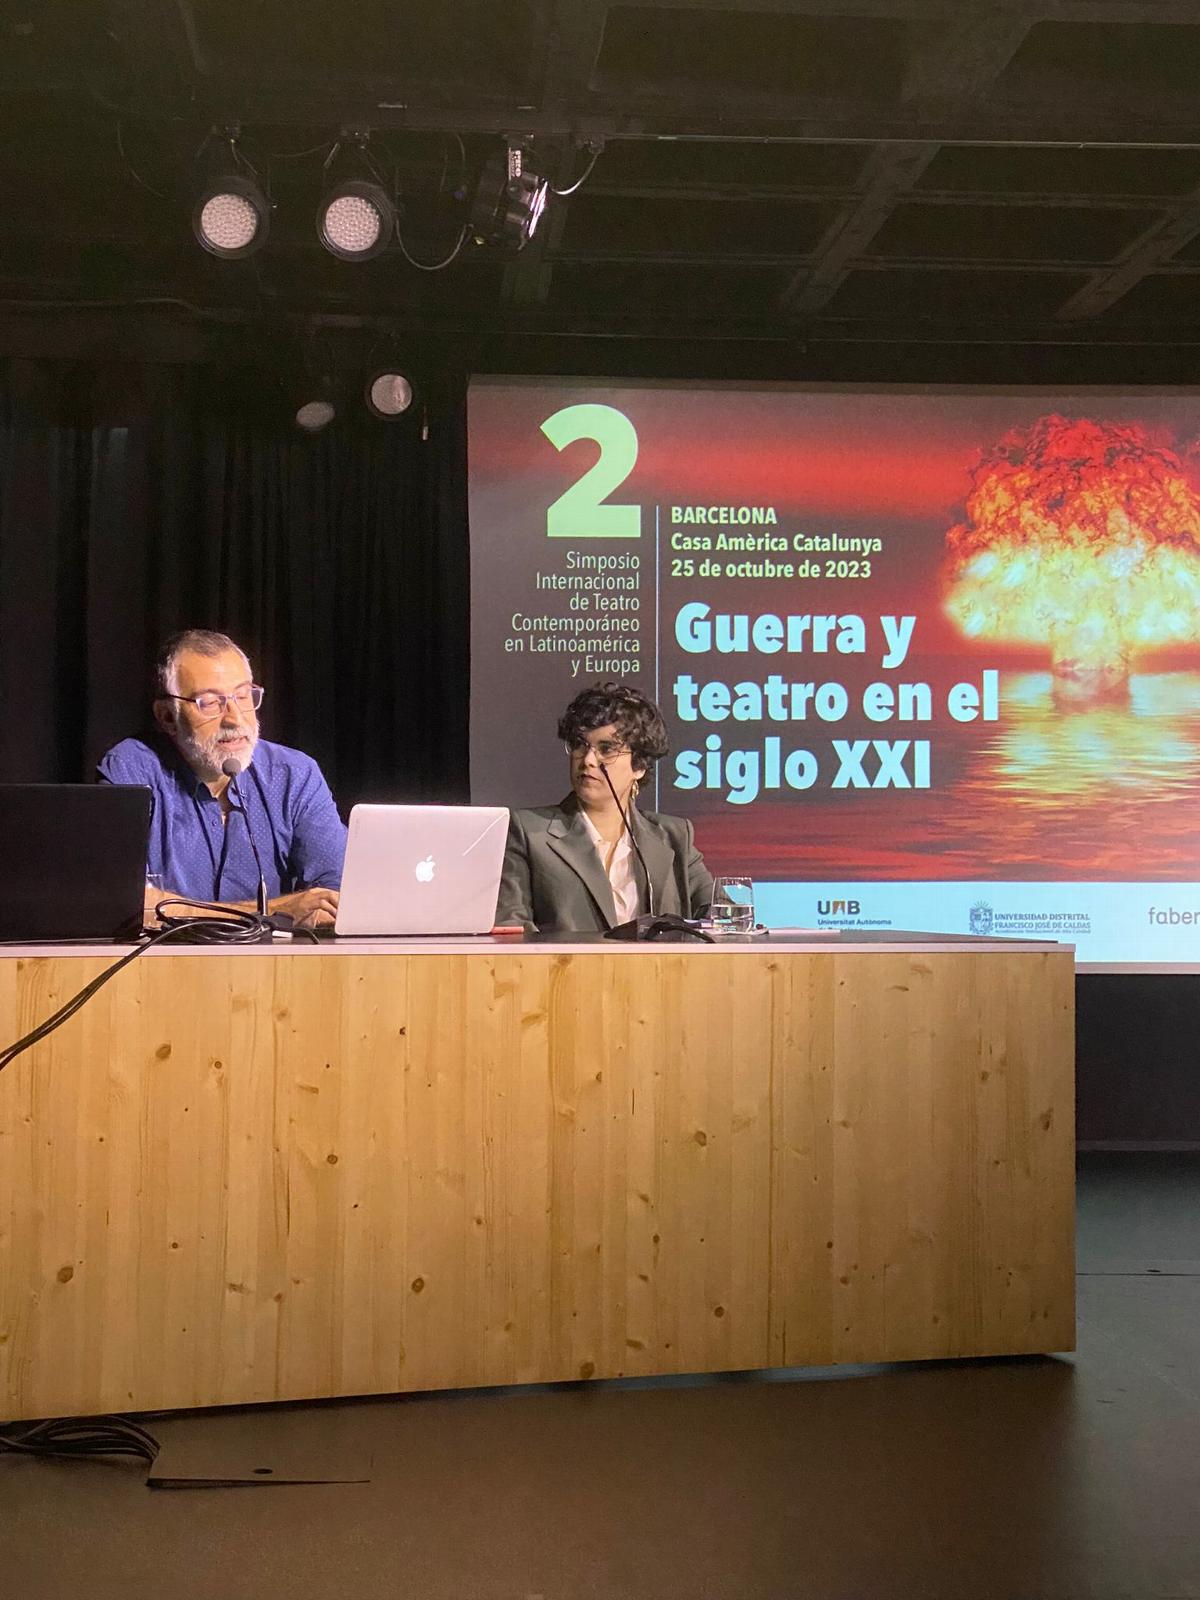 International symposium on war and theater in Barcelona